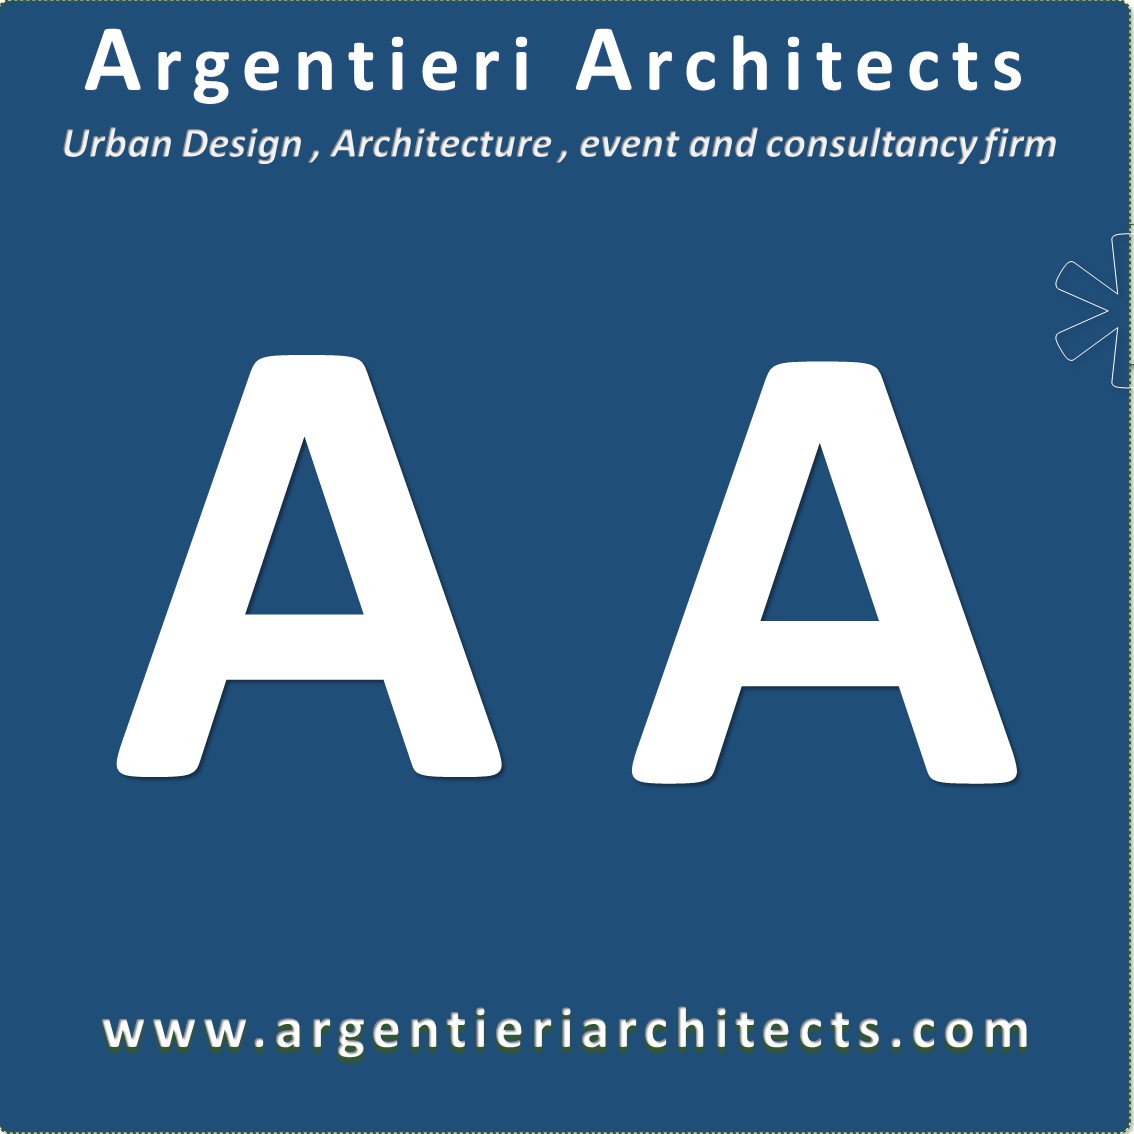 Profile- Argentieri Architects is an innovation and design firm. International expert on urban strategies & development, Smart Cities, architecture , retail and hospitality  